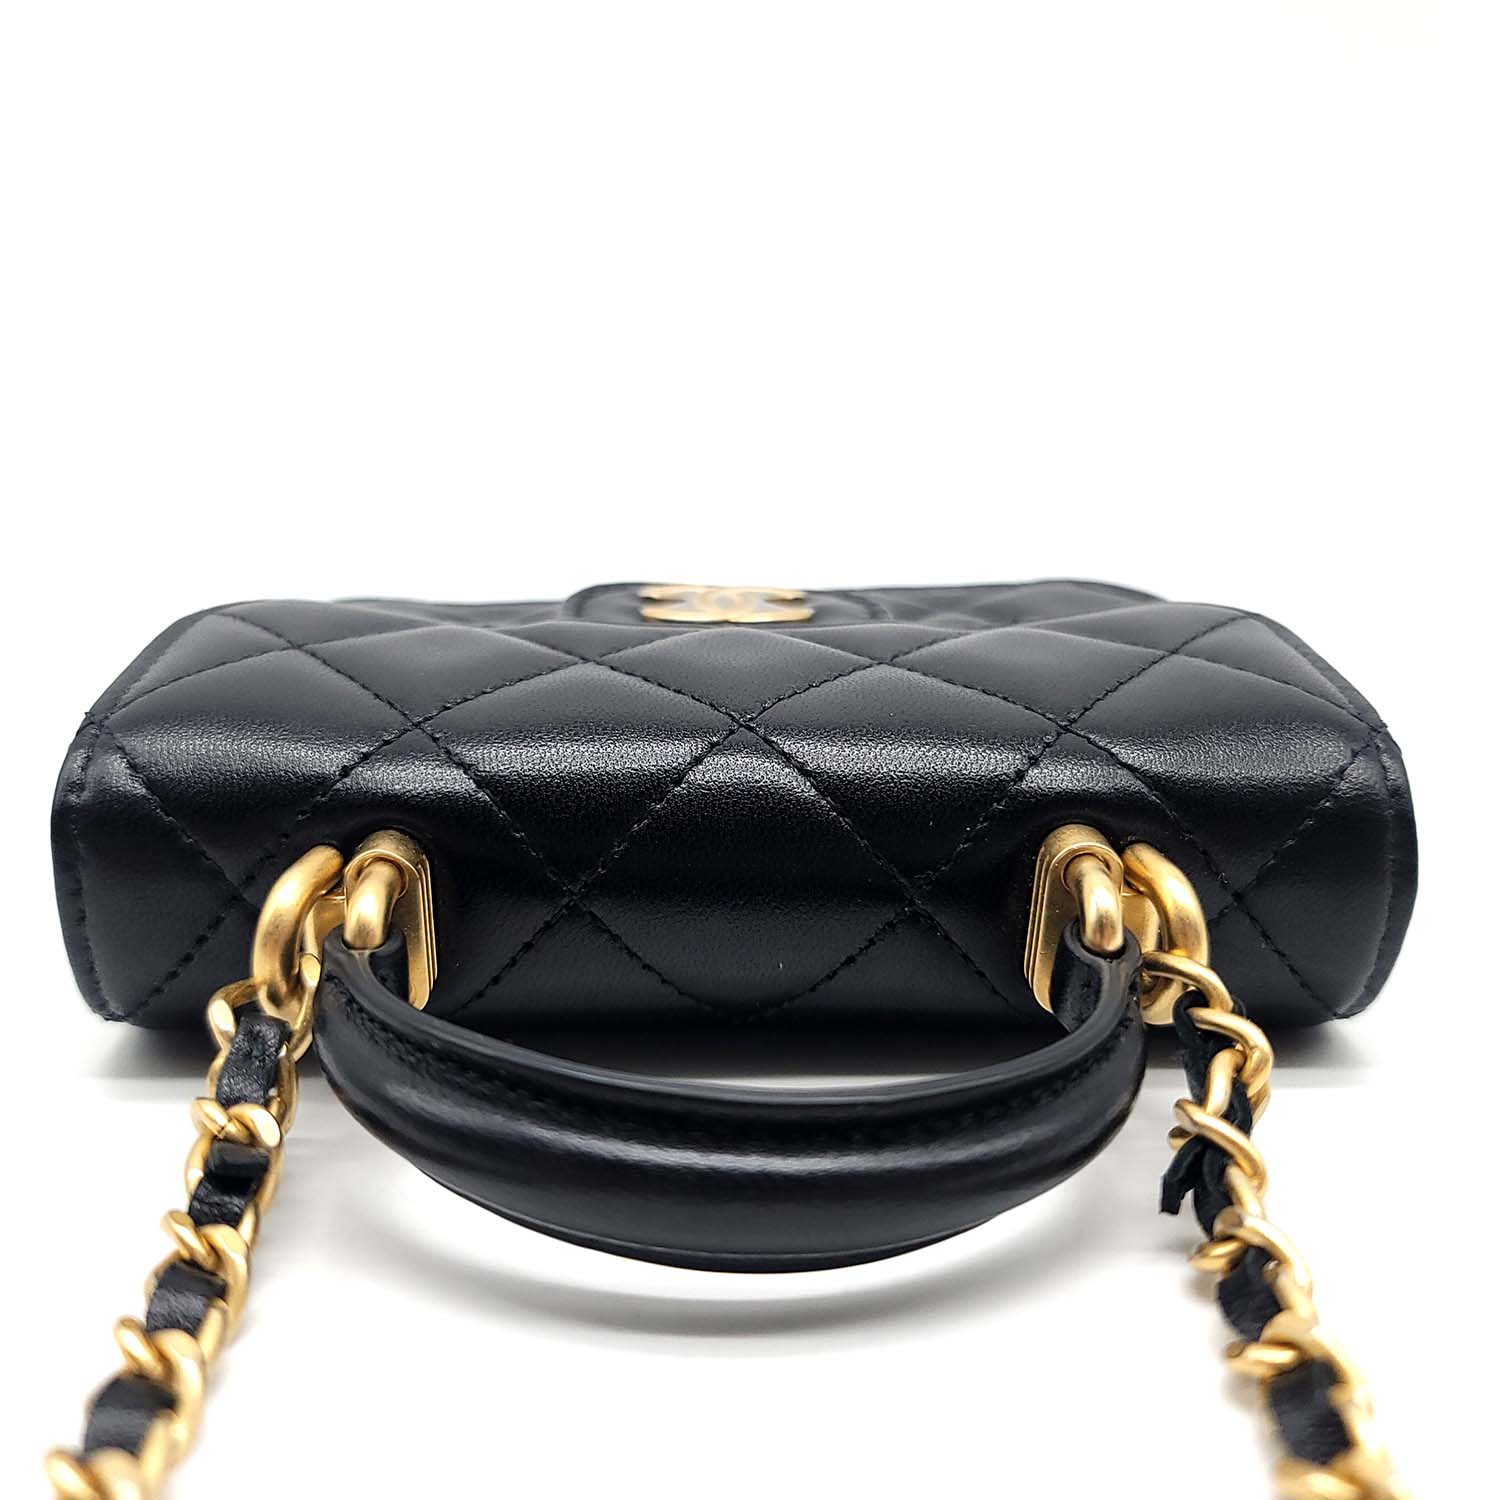 CHANEL Lambskin Quilted Casino Coin Purse Black 236453